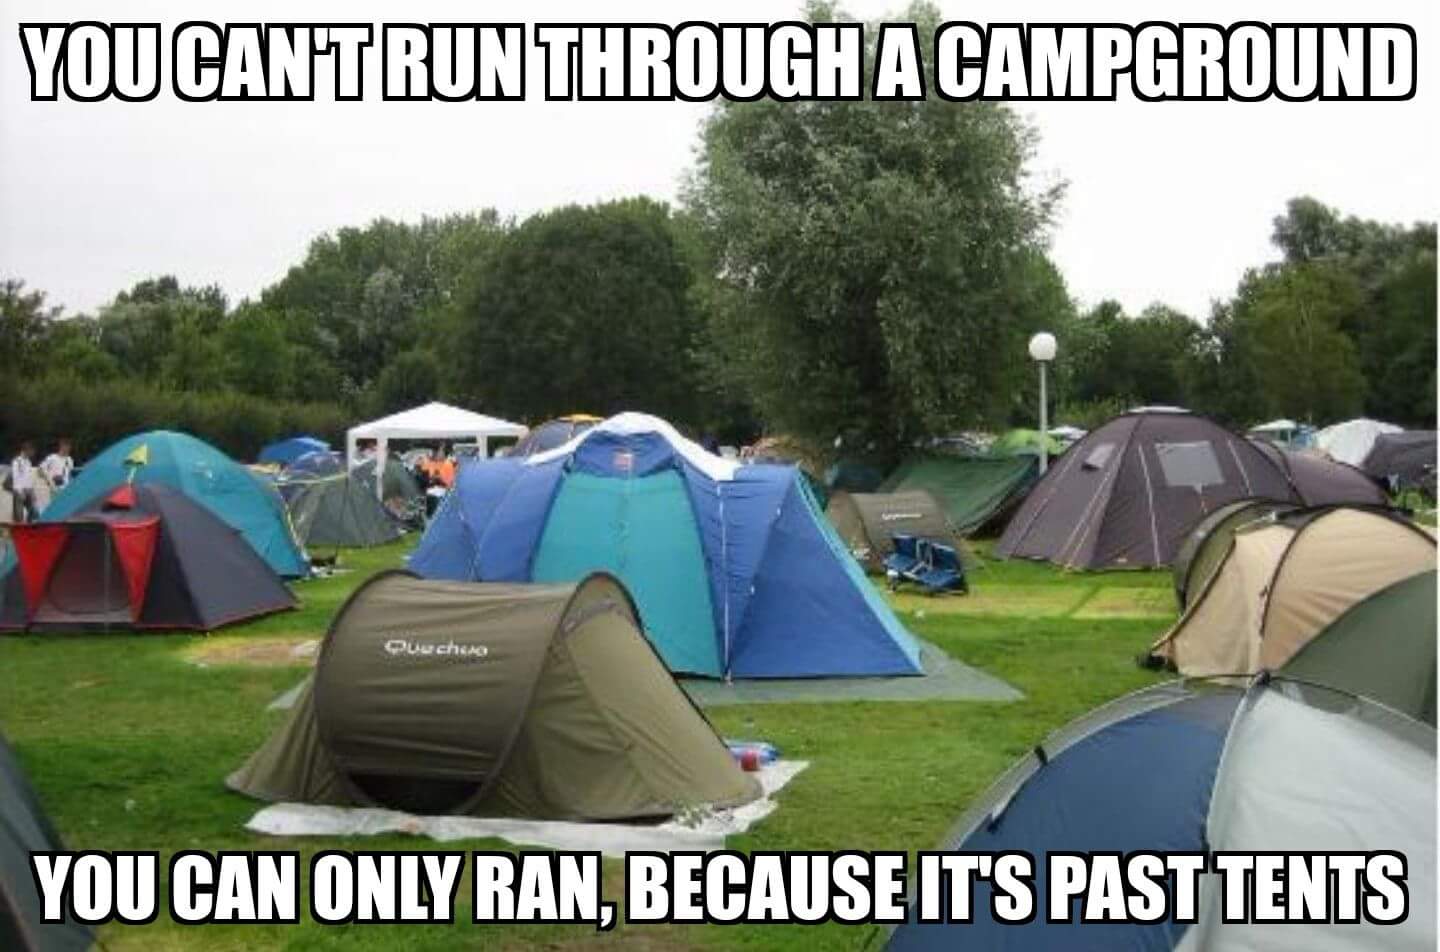 Image result for Why aren't you allowed to run in a campsite? Because you can only ran, since it's past tents.